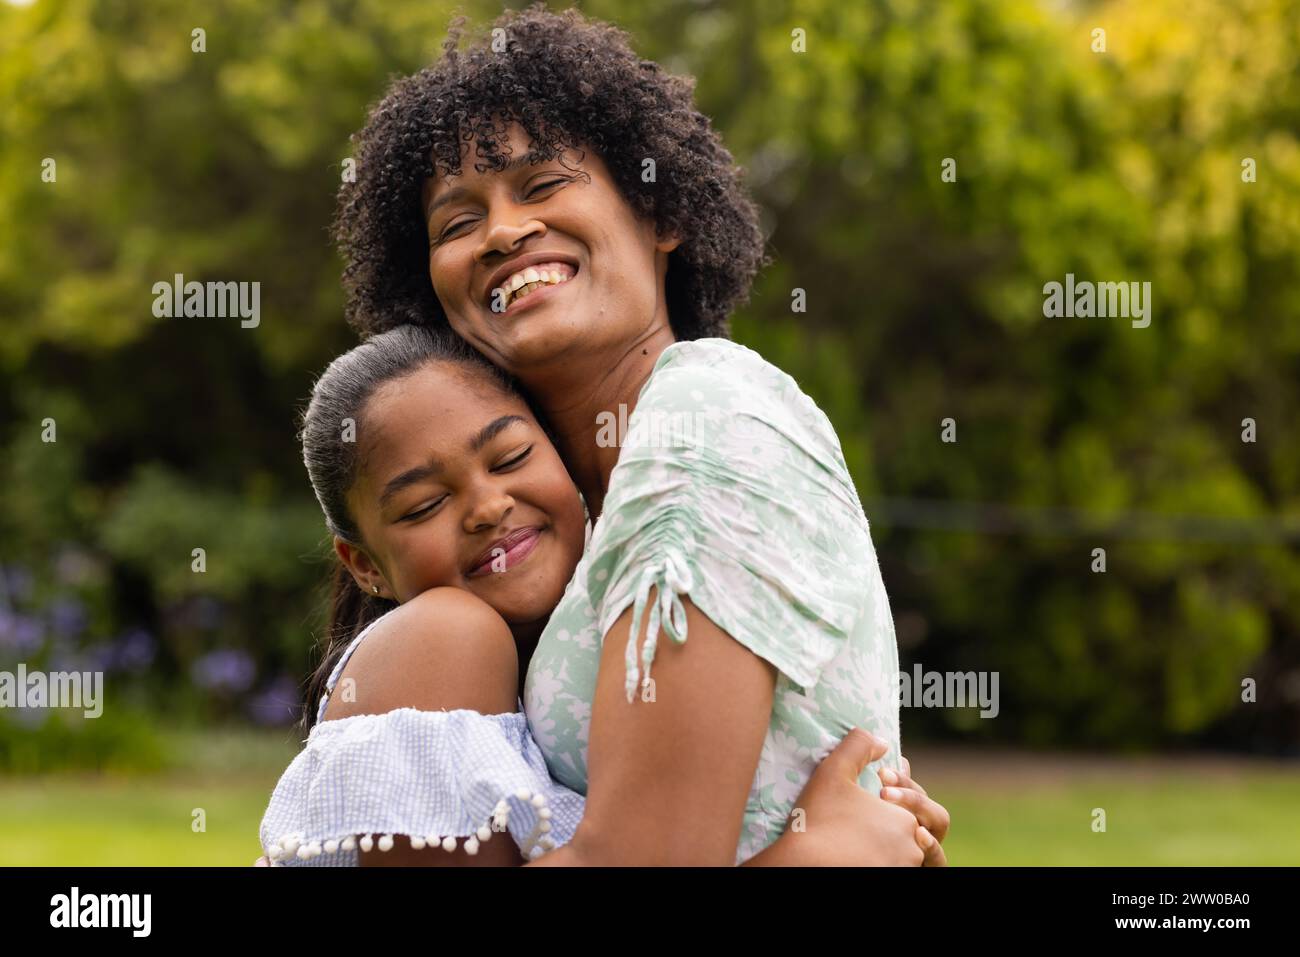 African American mother and daughter share a warm embrace outdoors Stock Photo